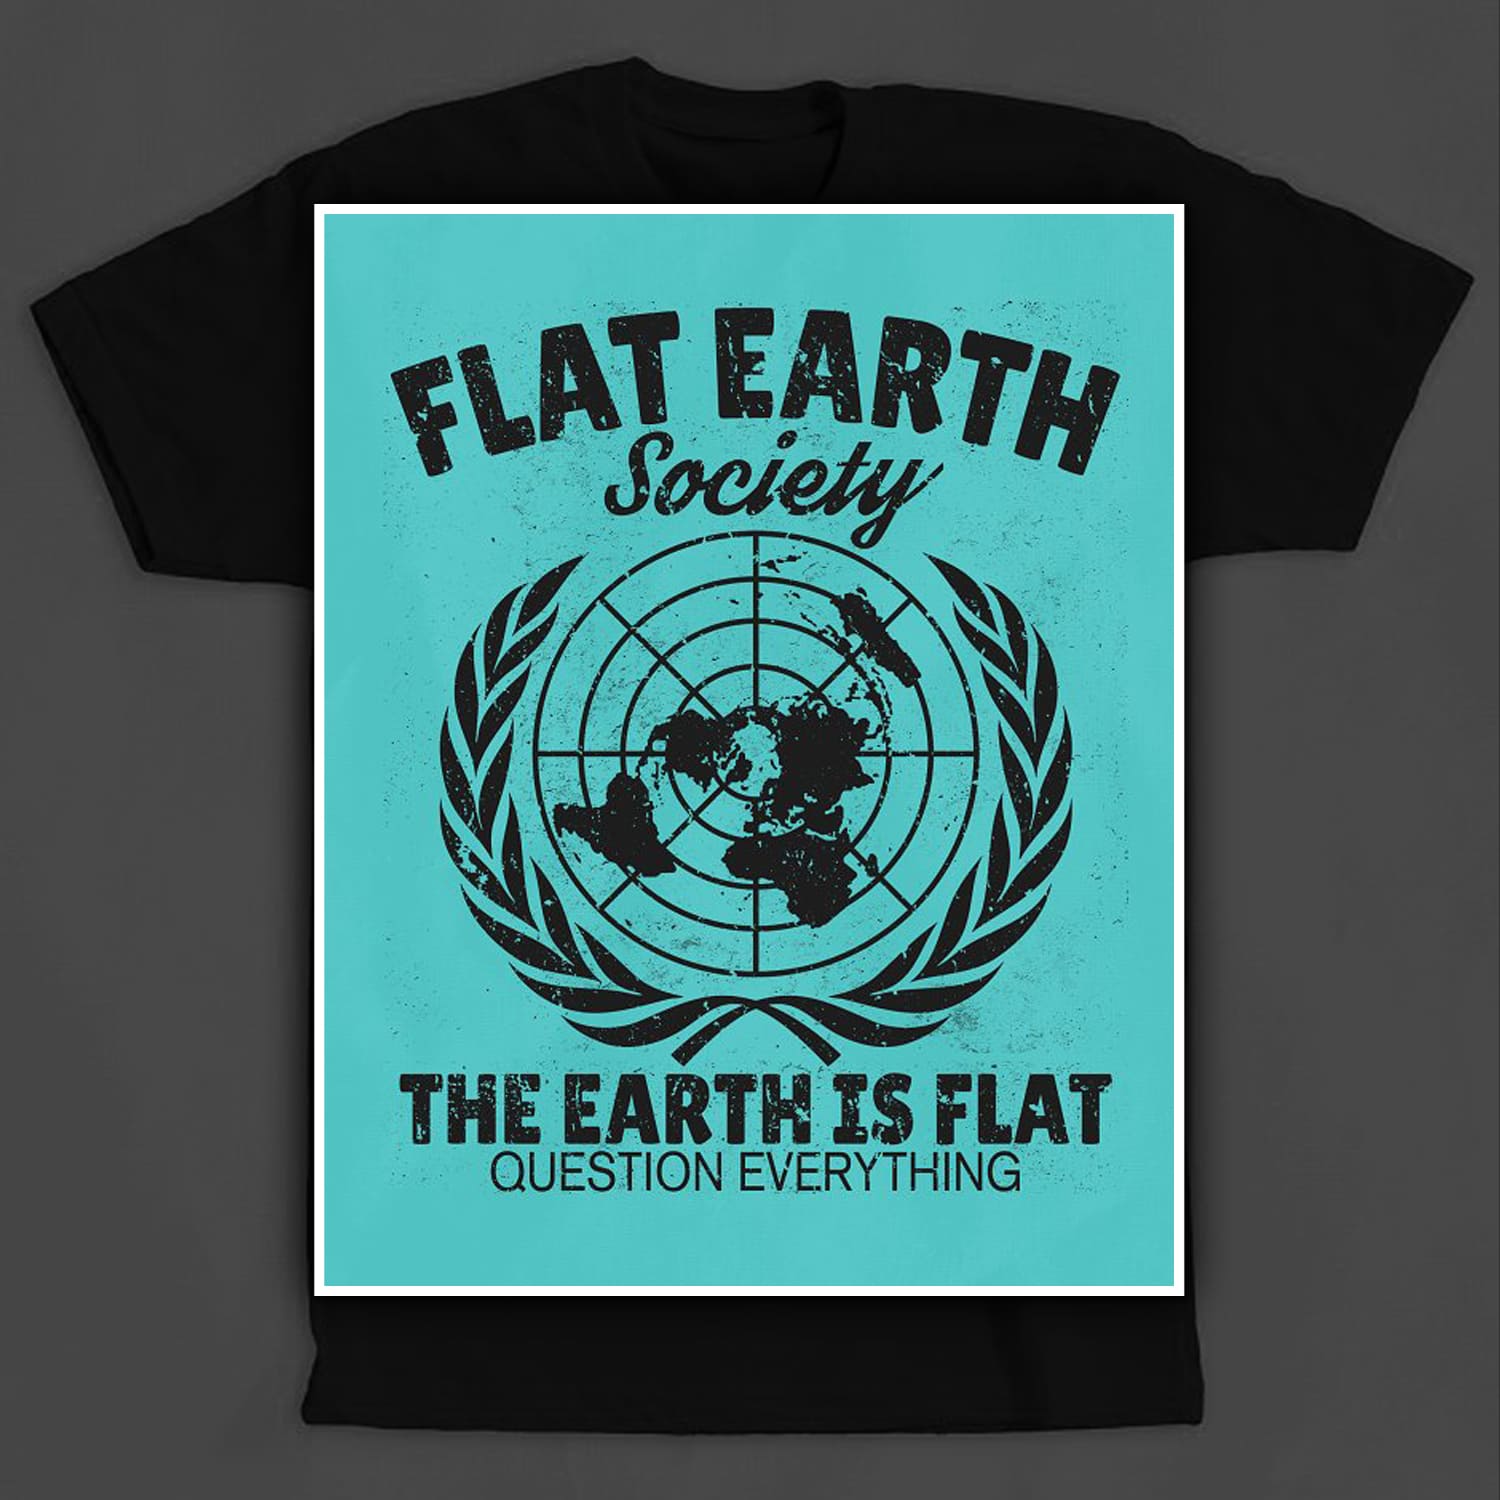 Flat Earth Society T-Shirt Design Cover.